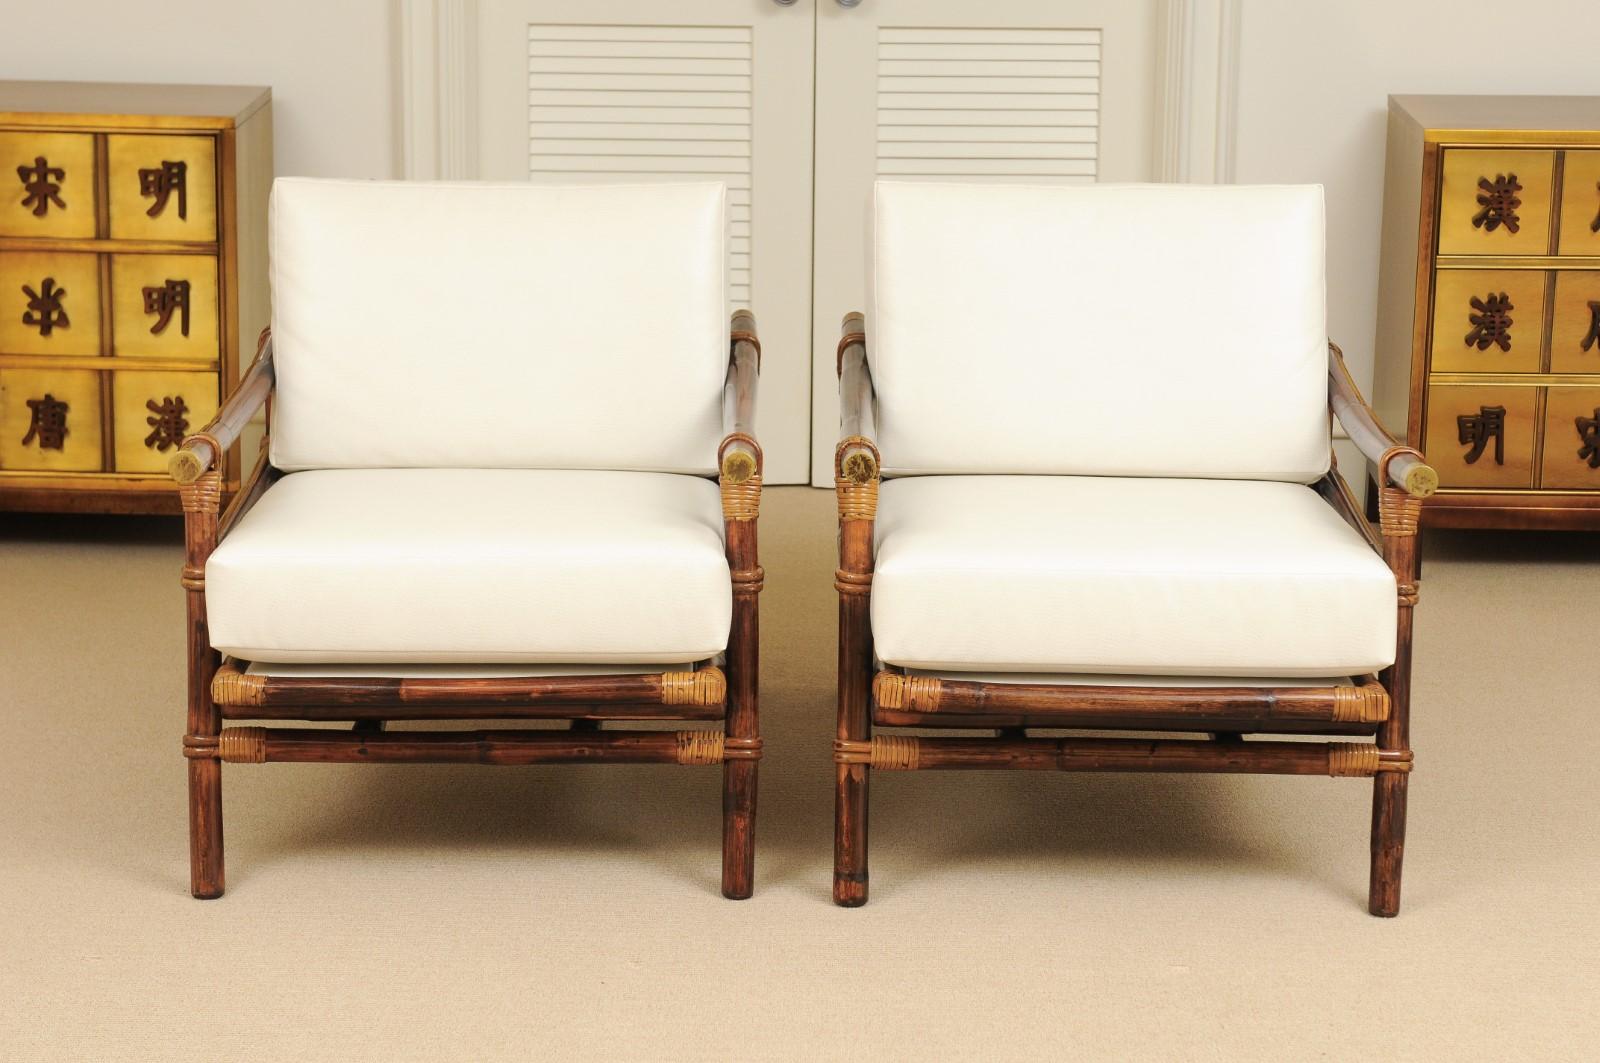 Superb Restored Pair of Campaign Loungers by Wisner for Ficks Reed, circa 1954 8